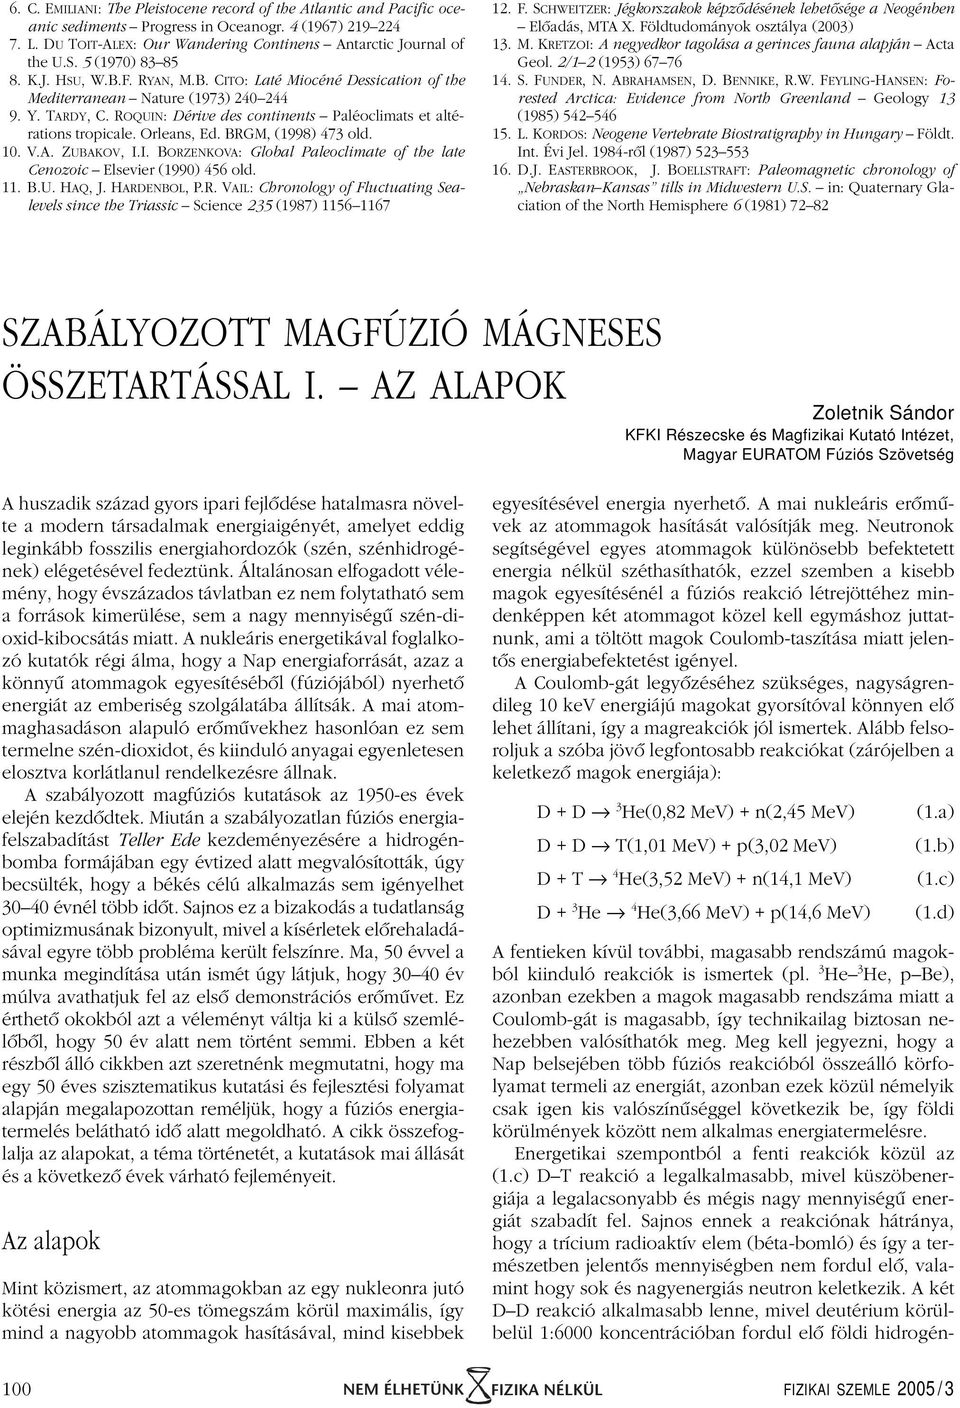 Orleans, Ed. BRGM, (1998) 473 old. 10. V.A. ZUBAKOV, I.I. BORZENKOVA: Global Paleoclimate of the late Cenozoic Elsevier (1990) 456 old. 11. B.U. HAQ, J.HARDENBOL, P.R. VAIL: Chronology of Fluctuating Sealevels since the Triassic Science 235 (1987) 11561167 12.